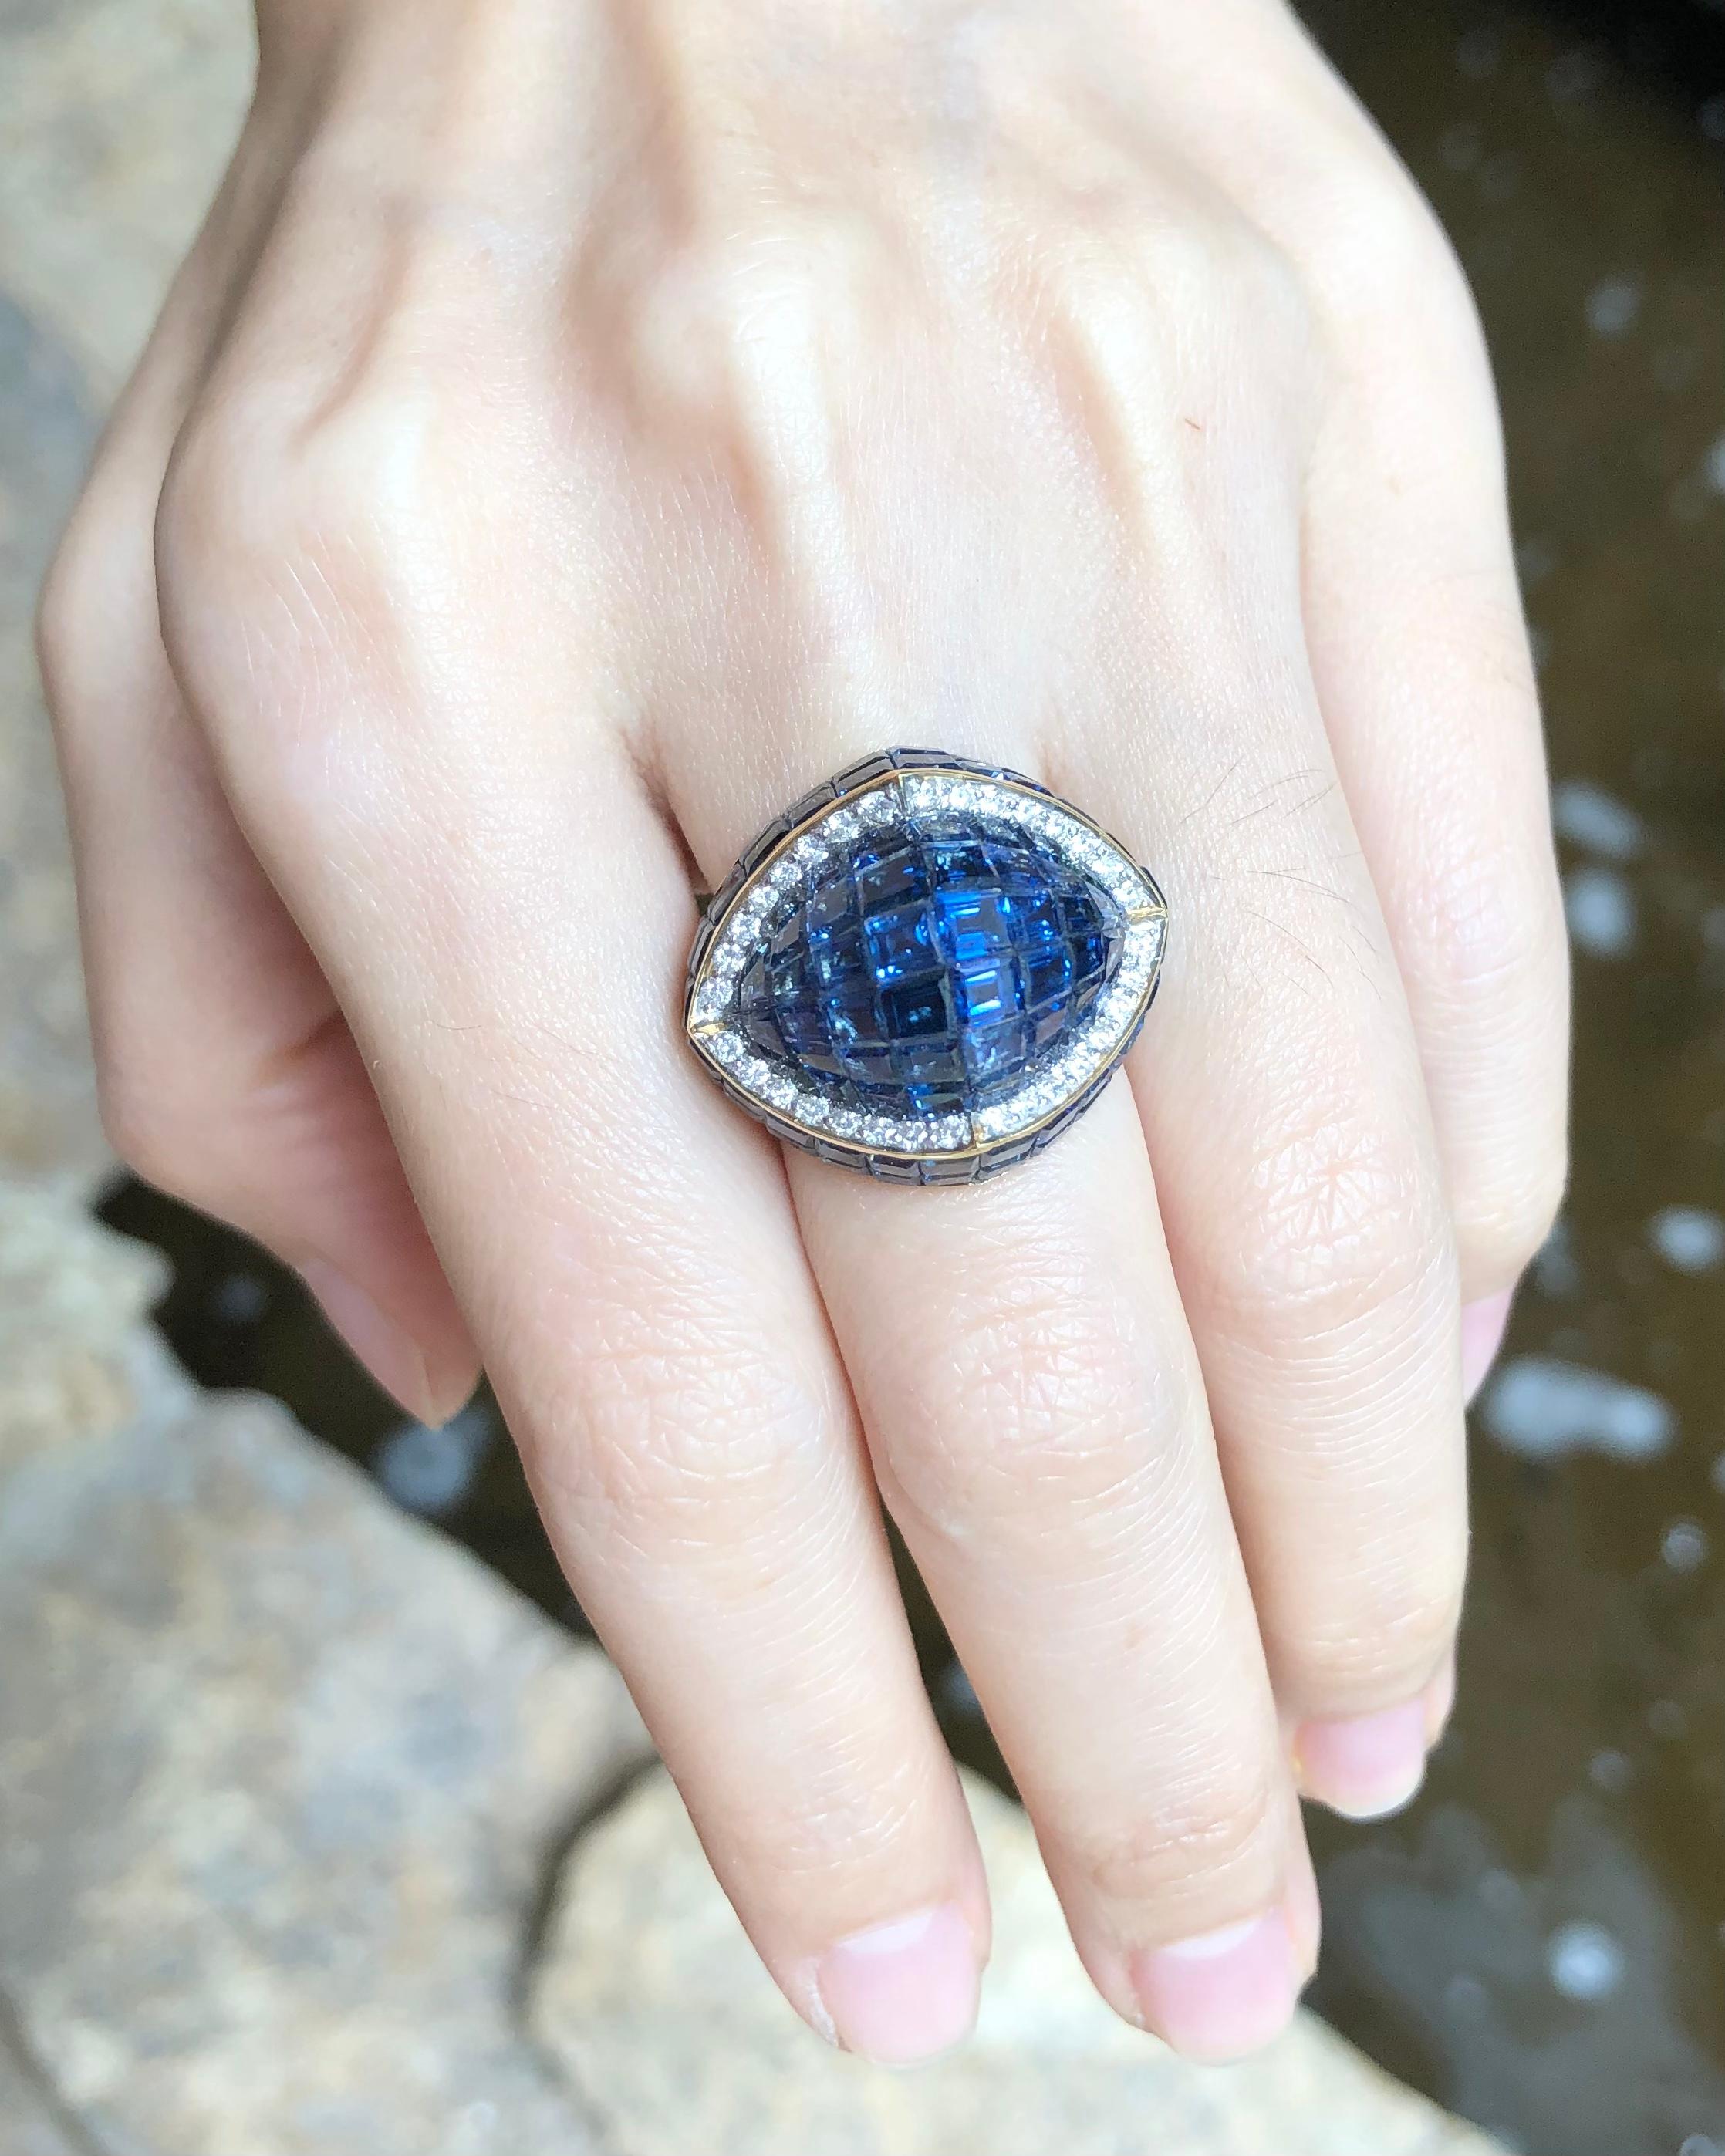 Blue Sapphire 27.50 carats with Diamond 0.36 carat Ring set in 18 Karat Gold Settings

Width:  2.3 cm 
Length: 2.6 cm
Ring Size: 53
Total Weight: 13.54 grams


